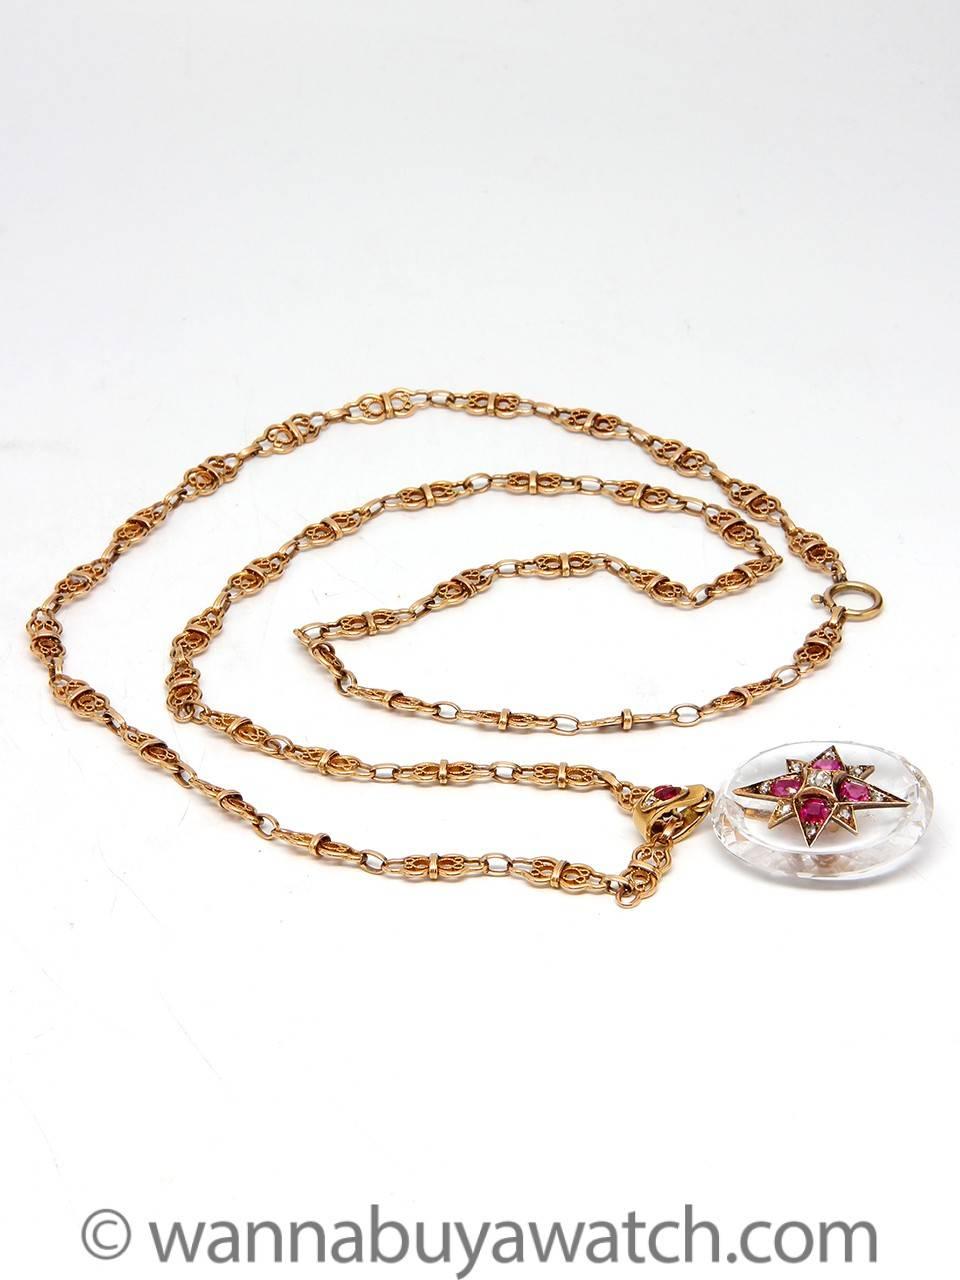 Gorgeous Victorian 18K yellow gold filigree link chain 30″ long with a large oval shaped faceted rock crystal pendant 44 x 25mm stunningly embellished with an 8 point elongated gold star set with 9 rose cut diamonds and 4 brilliant natural rubies.